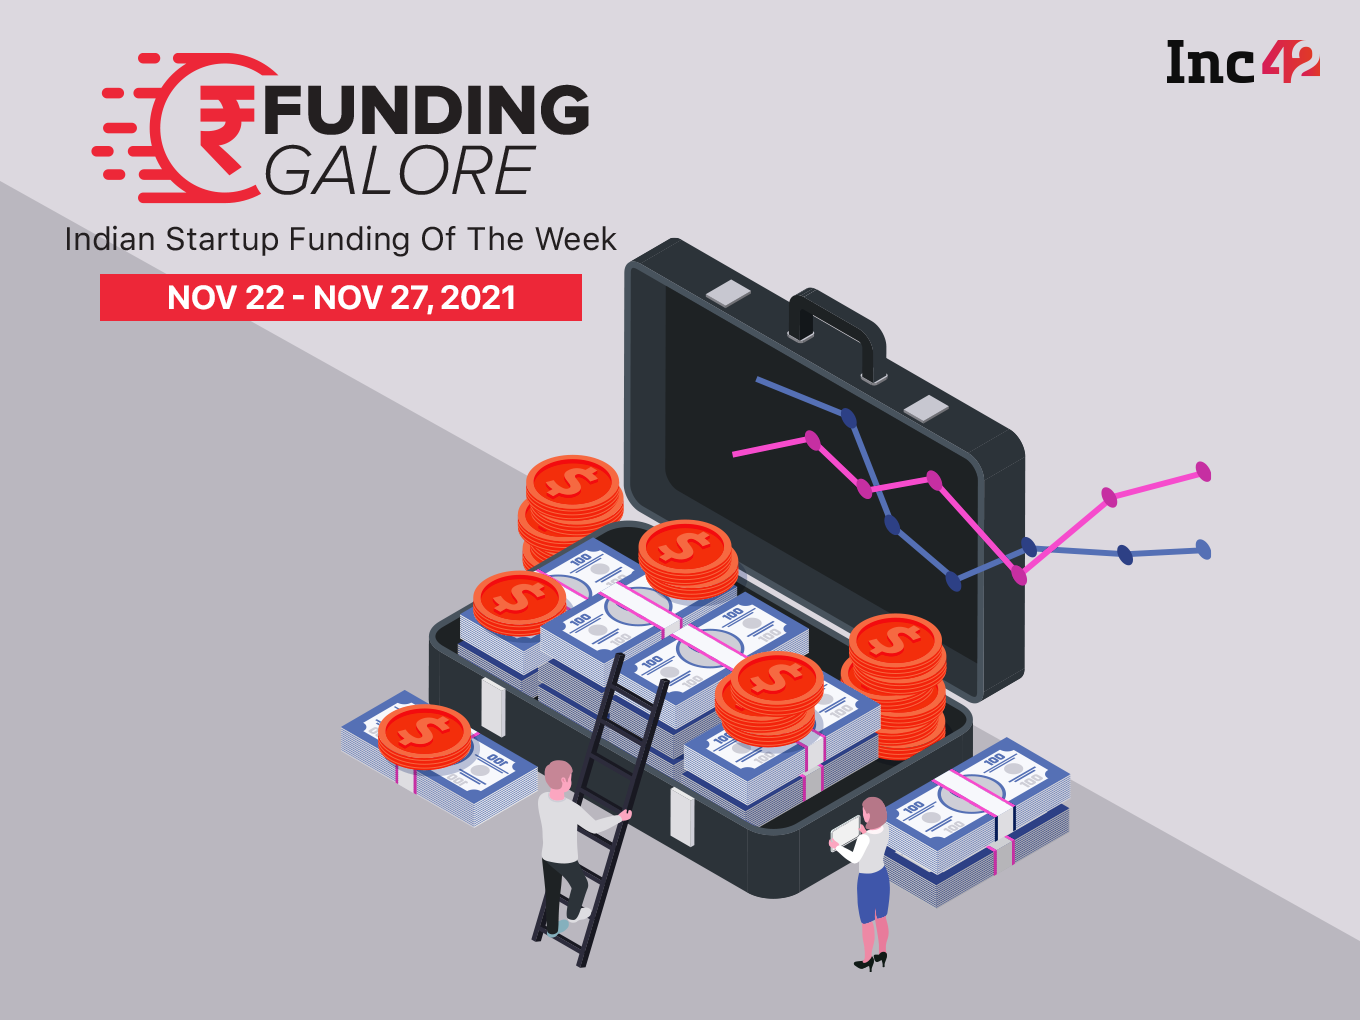 [Funding Galore] From Dream Sports To NoBroker—Over $1.8 Bn Raised By Indian Startups This Week